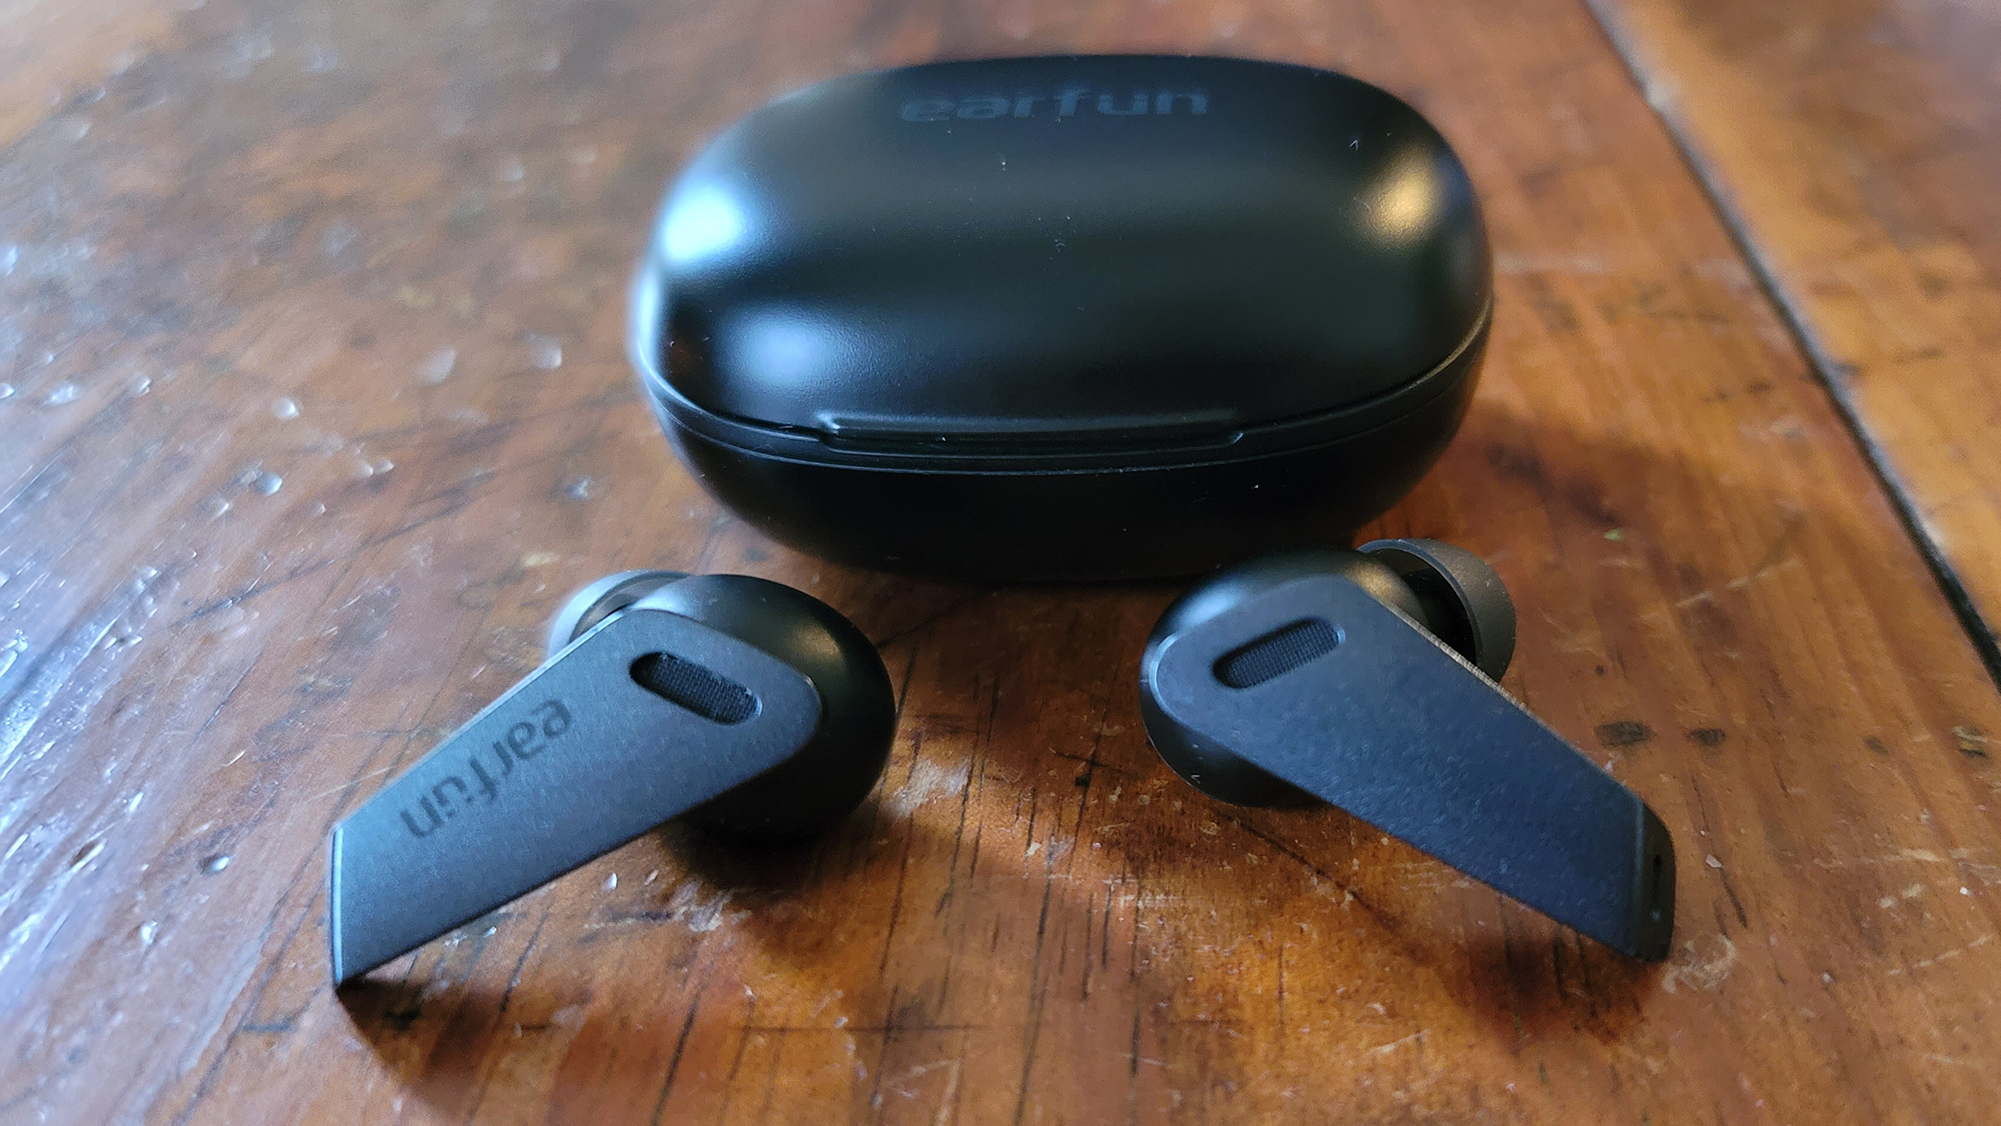 EarFun Air Pro true wireless earbuds sitting in front of their case